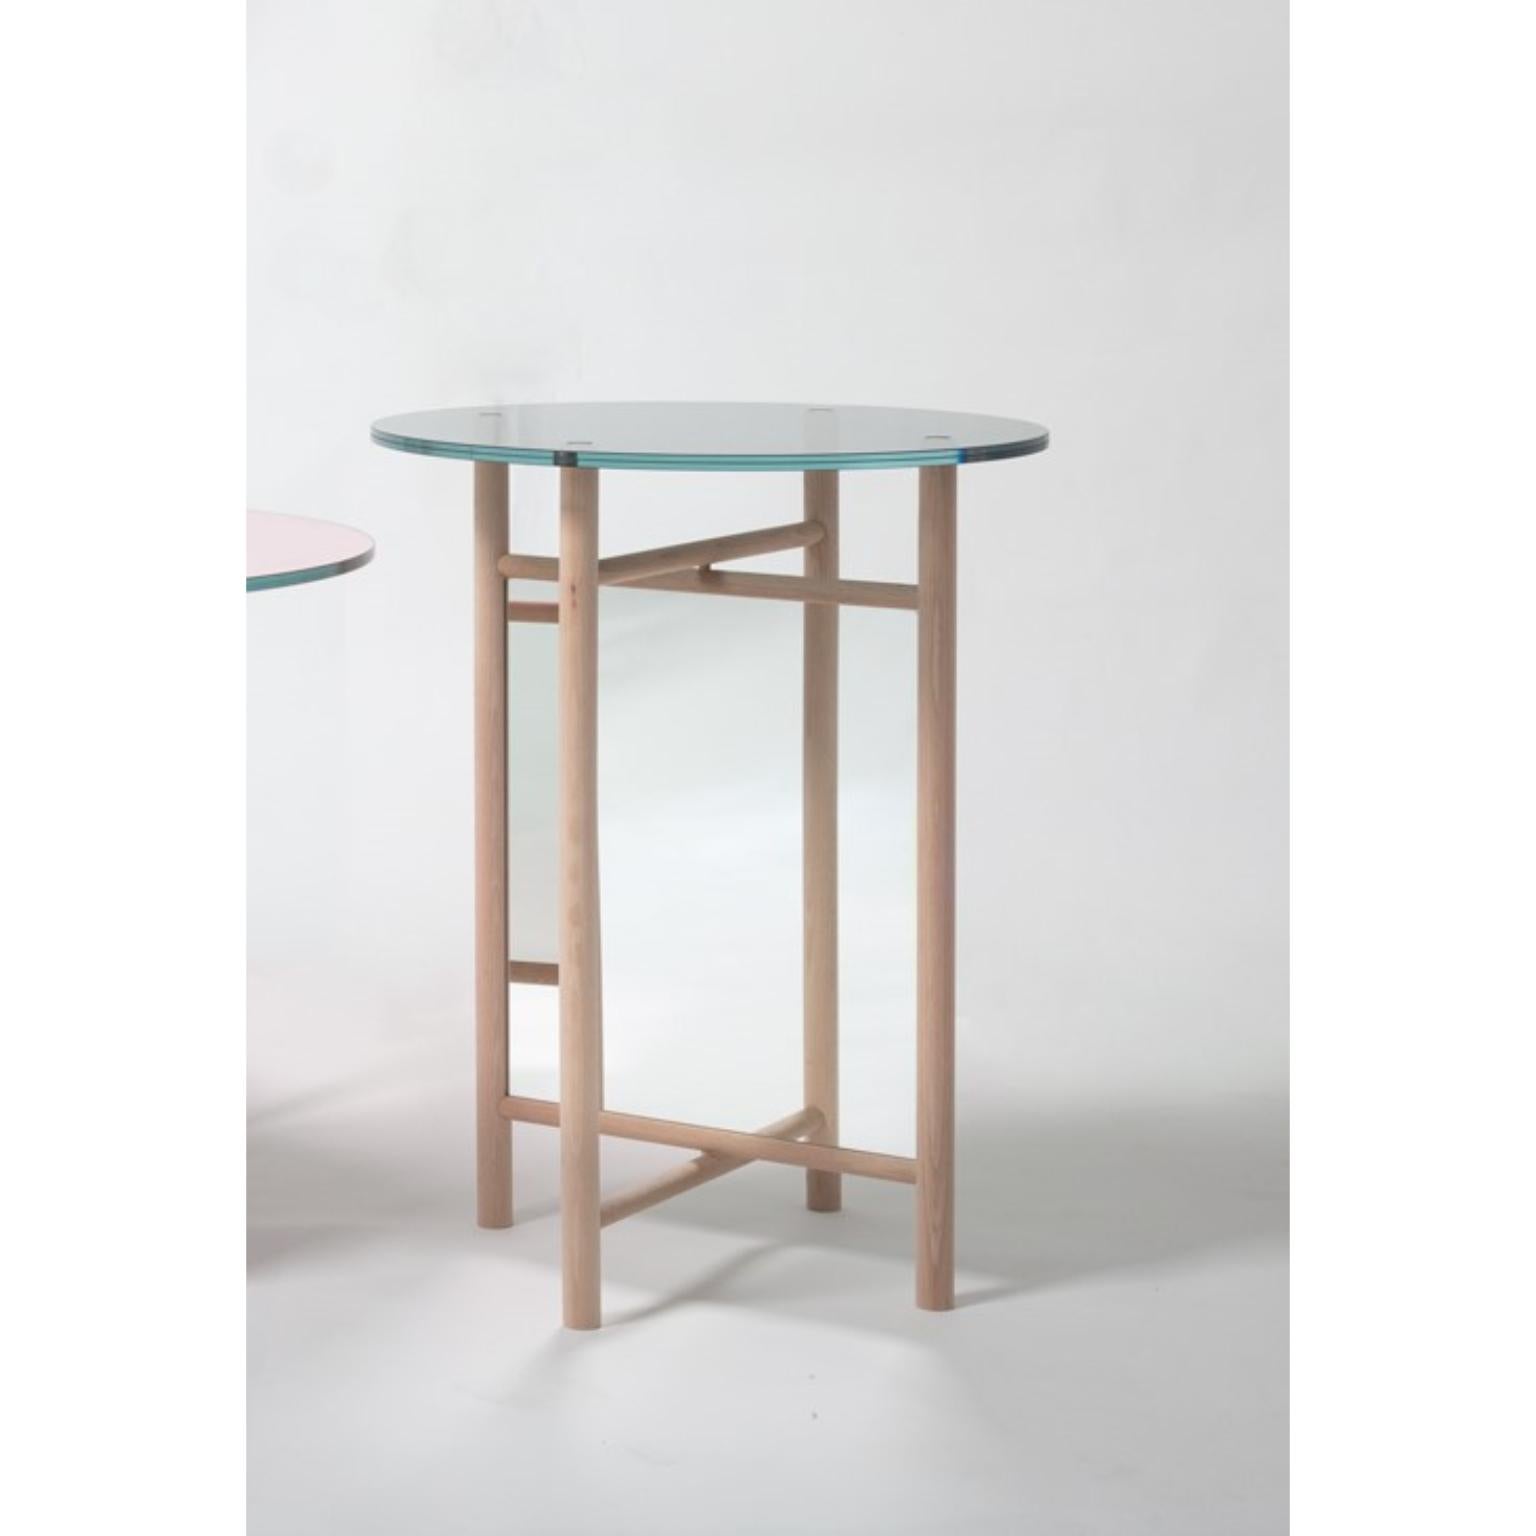 Glass Son Table by Llot Llov
Dimensions: Ø 48 x H 60 cm
Materials: Beech, Mirror, Glass

If you look at the ELIAS and SON tables from afar, the mirrors that are attached within the inner frames are making it seem as if you could see through the